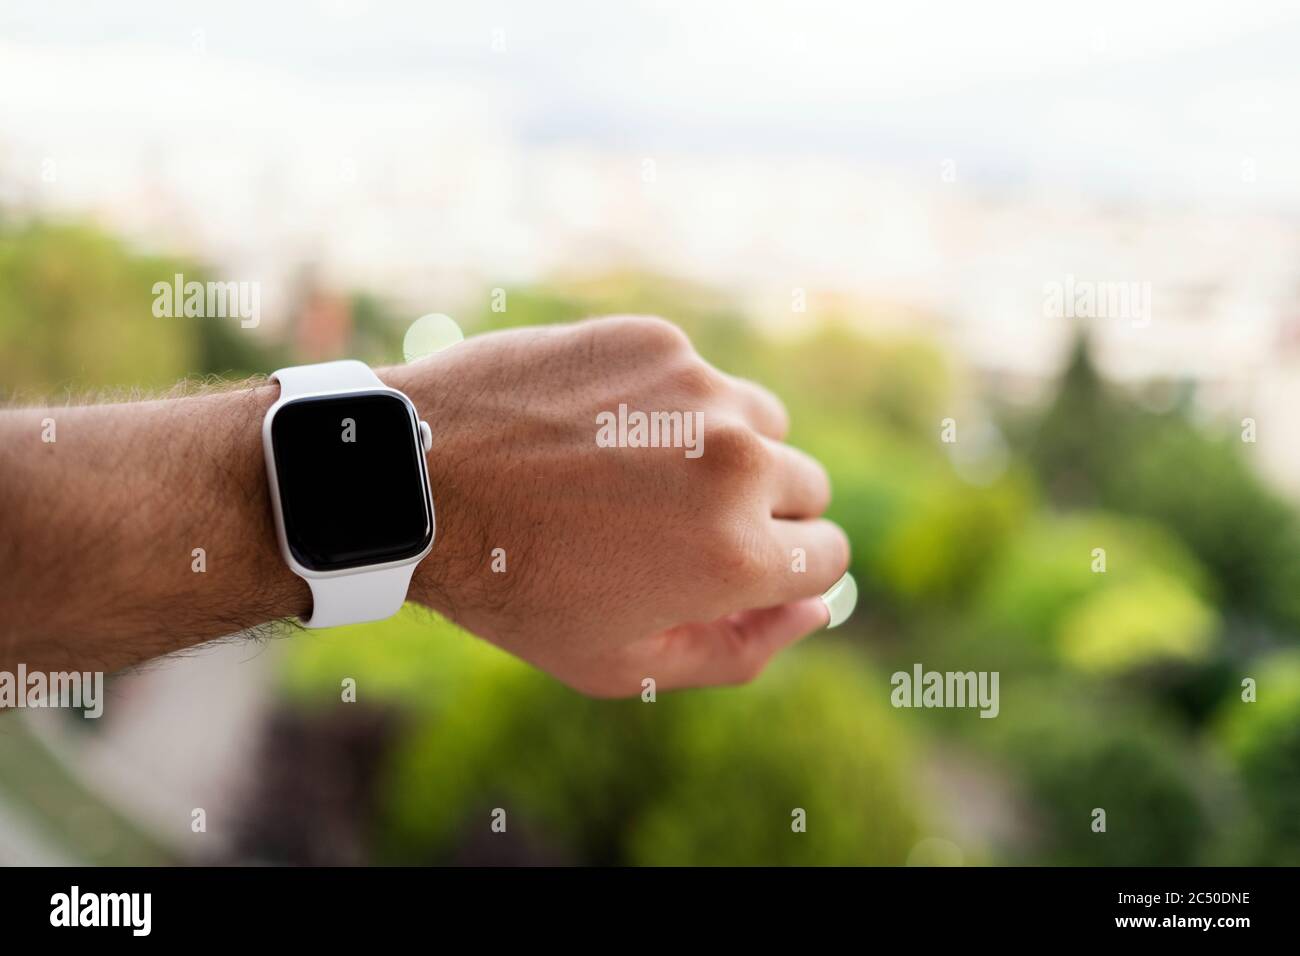 Izmir, Turkey - June 11, 2020: Close up shot of Apple brand 5th generation white colored Apple watch on a mans wrist and defocused green background. Stock Photo